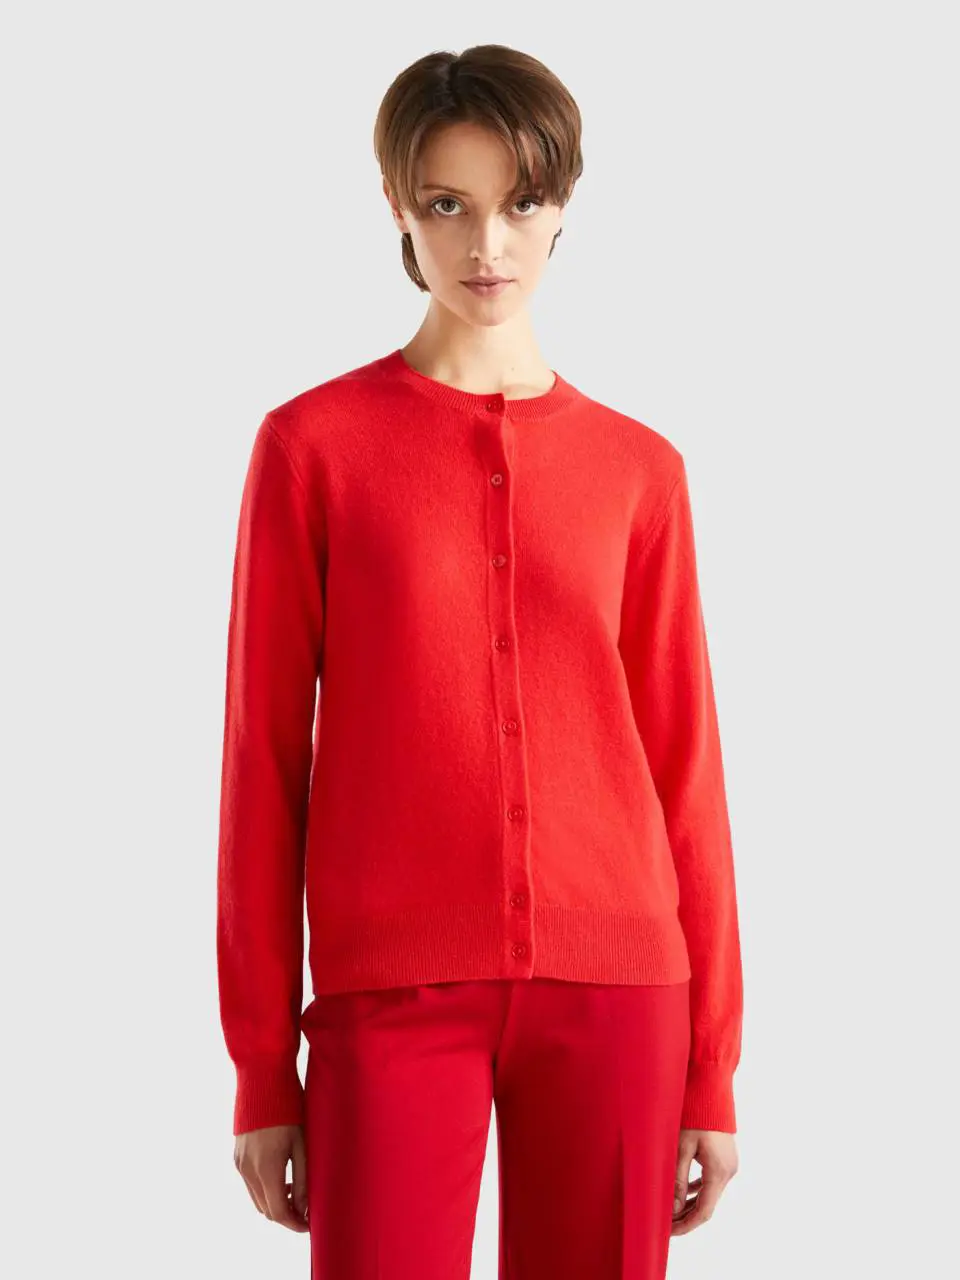 Benetton coral red cardigan in pure cashmere. 1